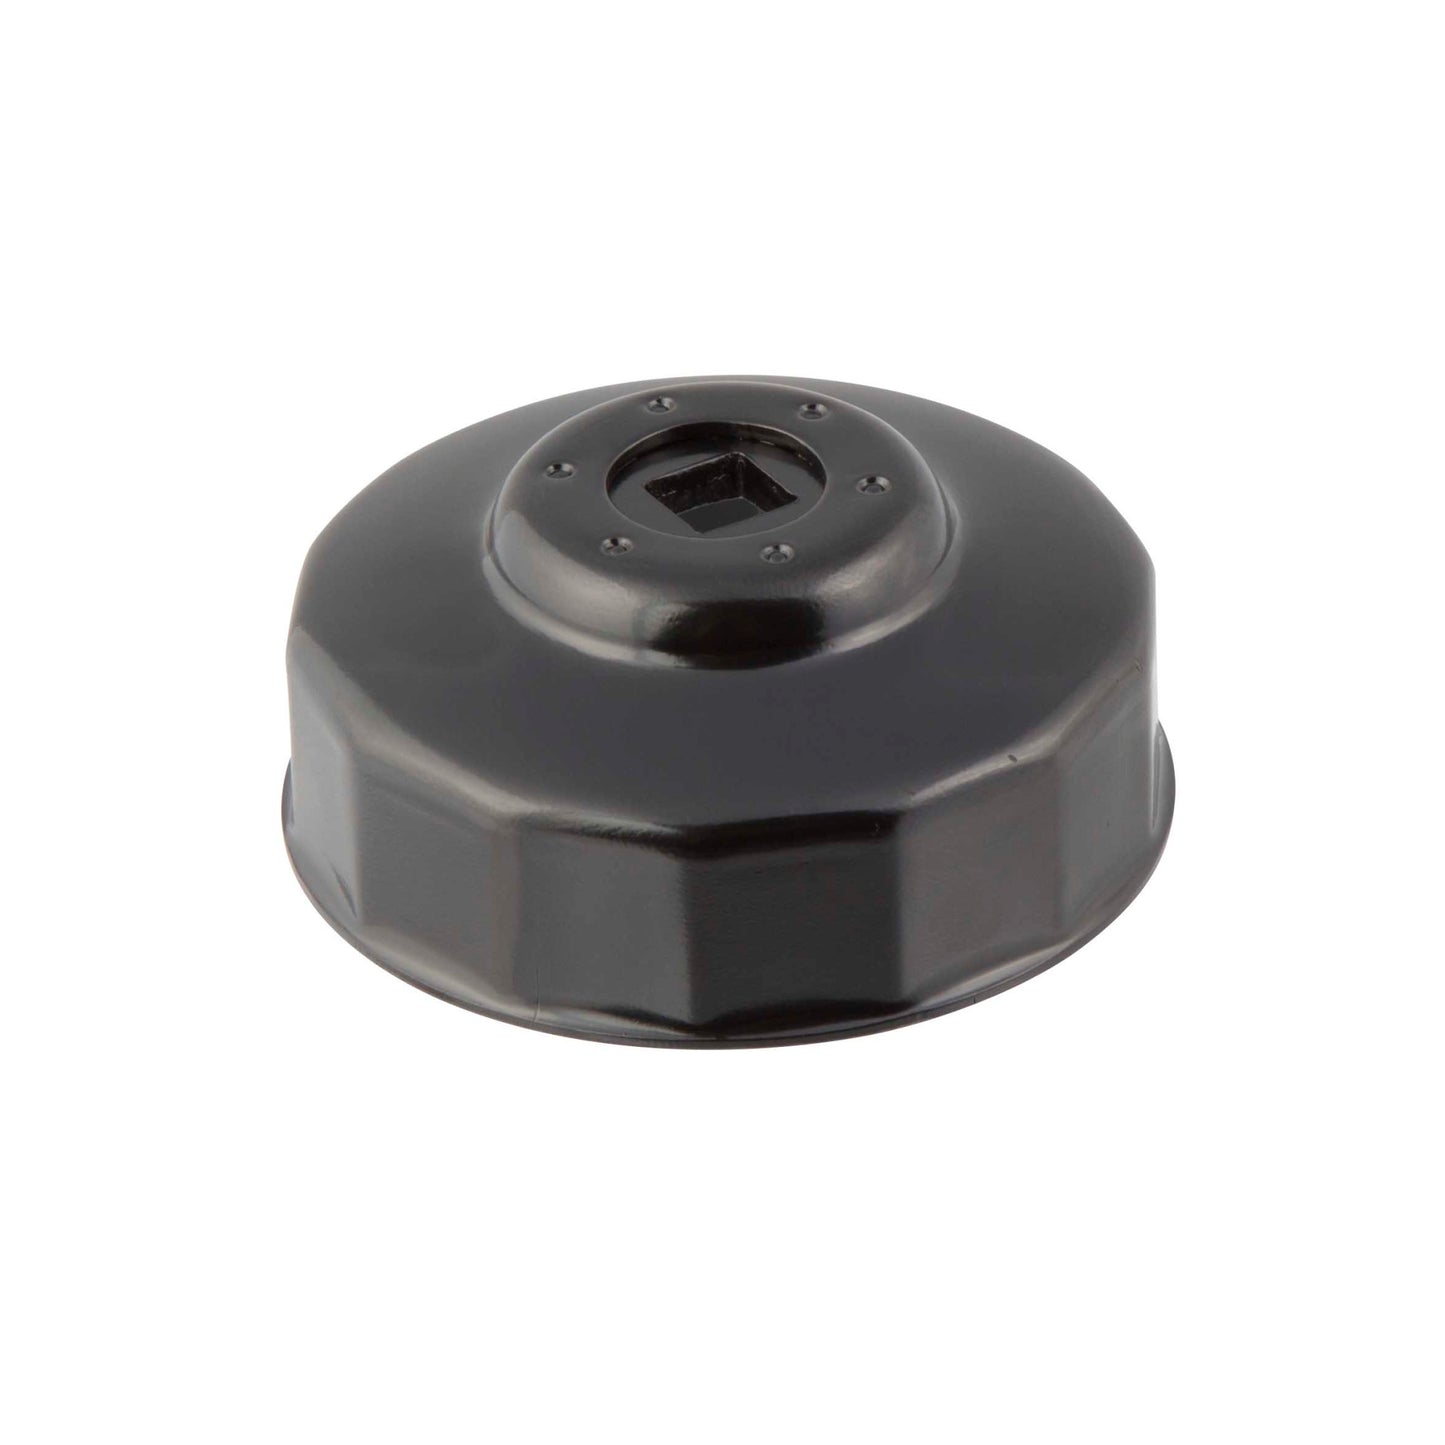 Oil Filter Cap Wrench 73mm x 14 Flute